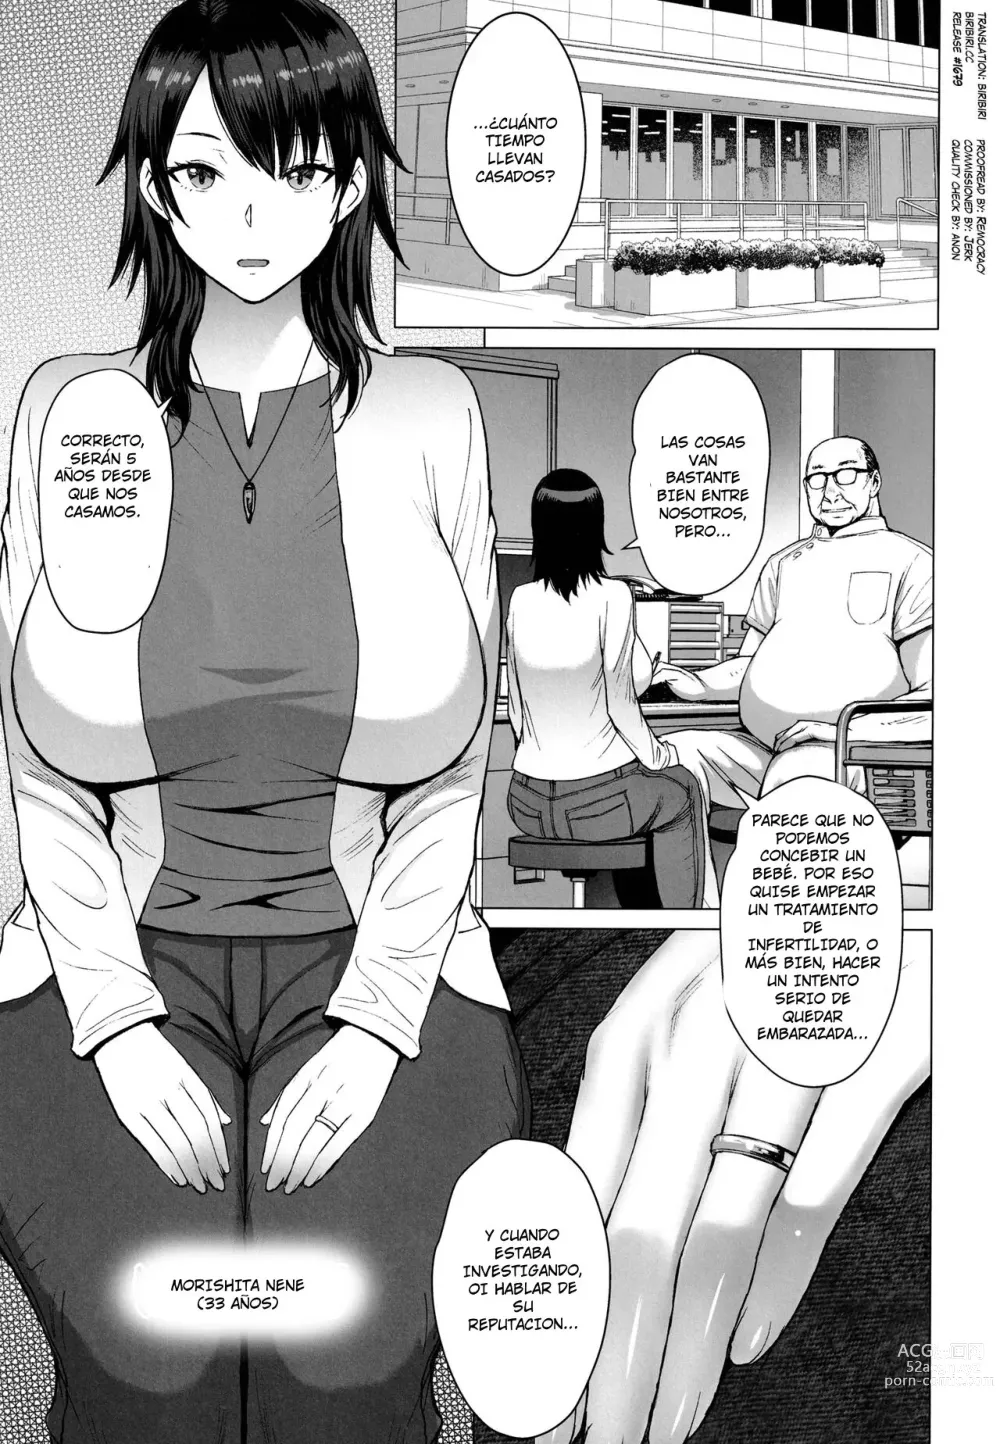 Page 2 of doujinshi Ninkatsu Hitozuma Collection - the collection of married women undergoing infertility treatment.